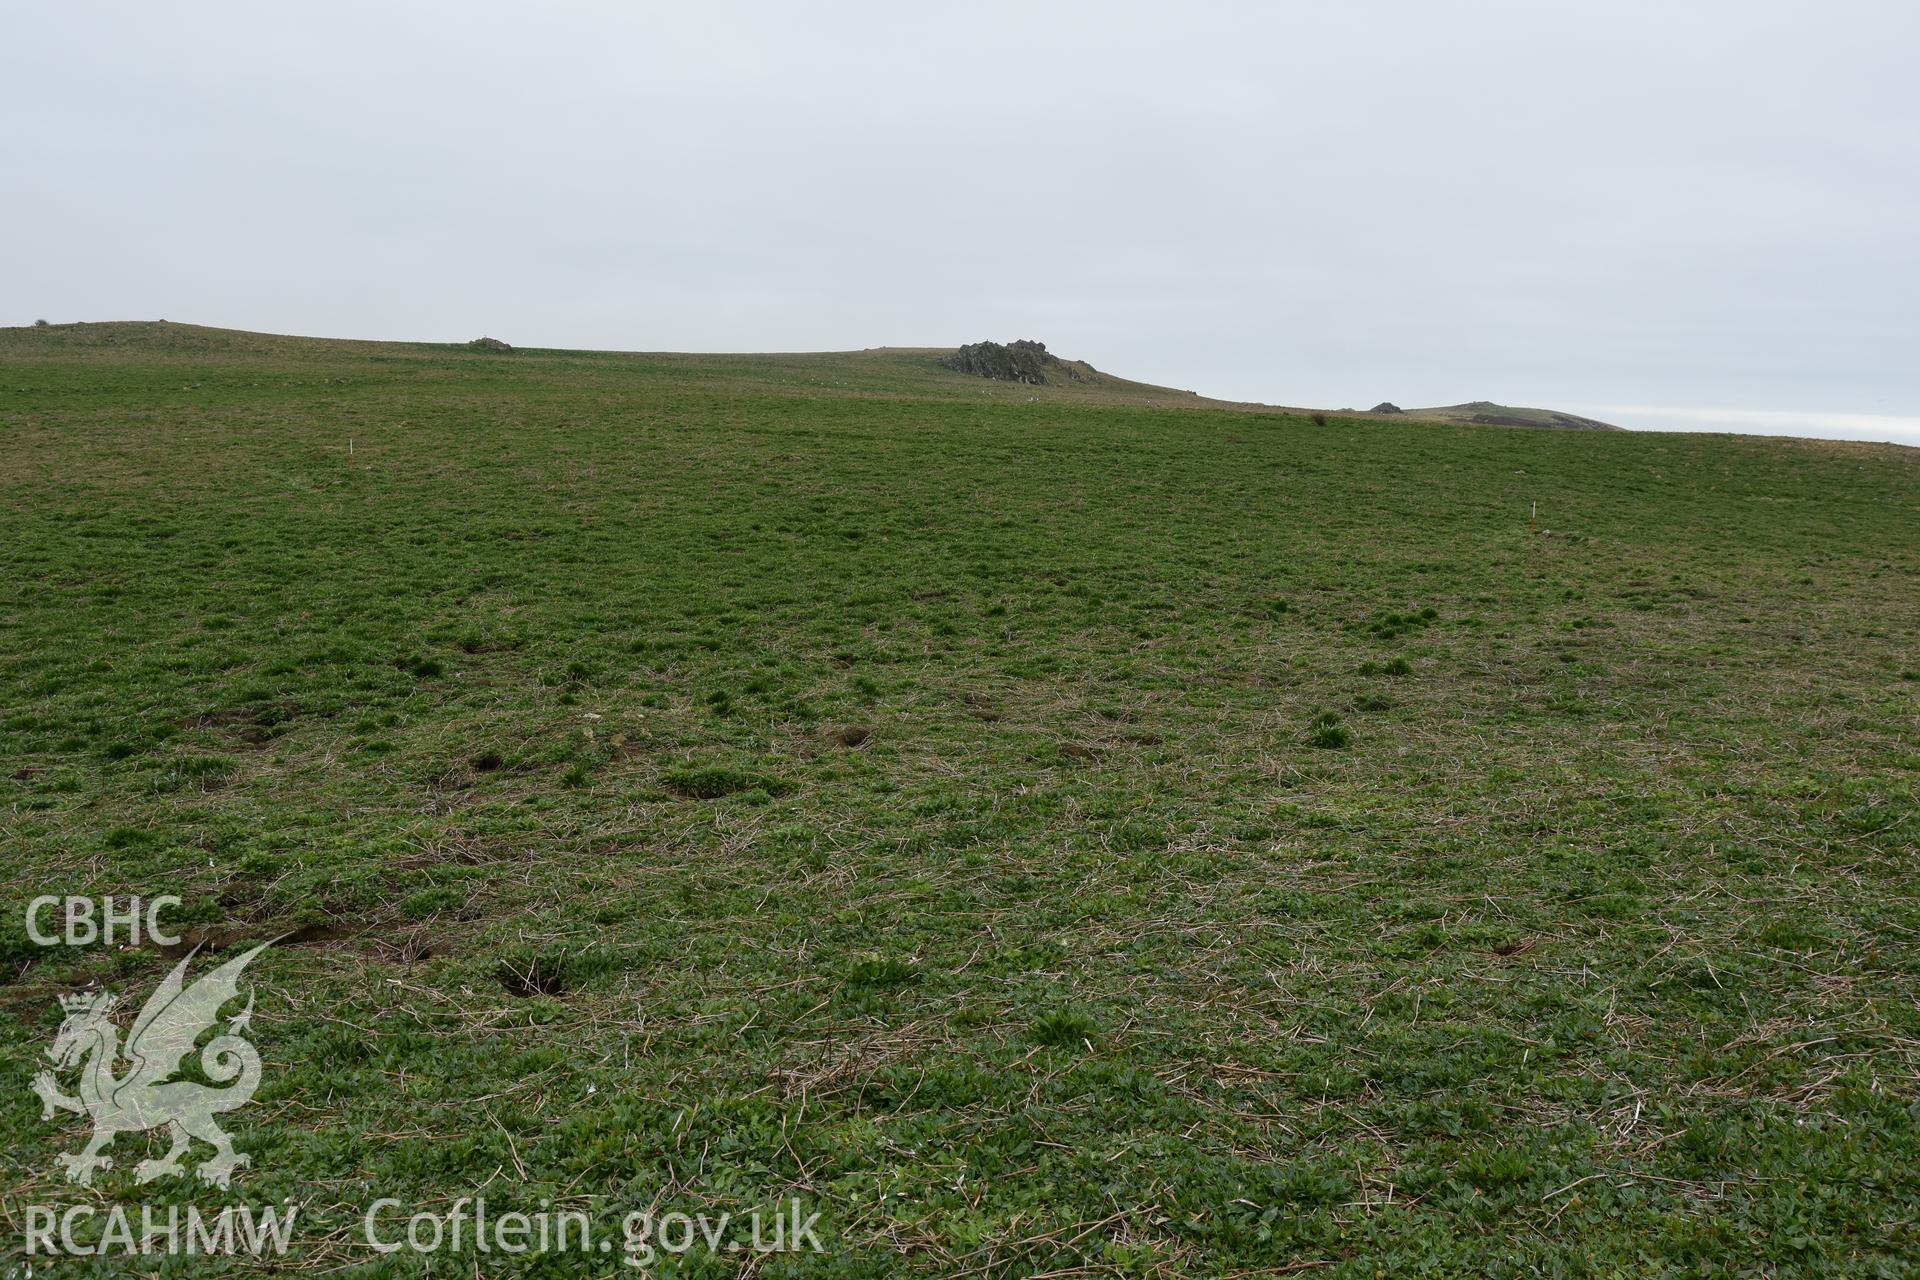 Skomer Island cairn group 1. Field survey 19 April 2018. General view of cairn cemetery and northern outcrop with low vegetation, with ranging rods marking cairns B and C